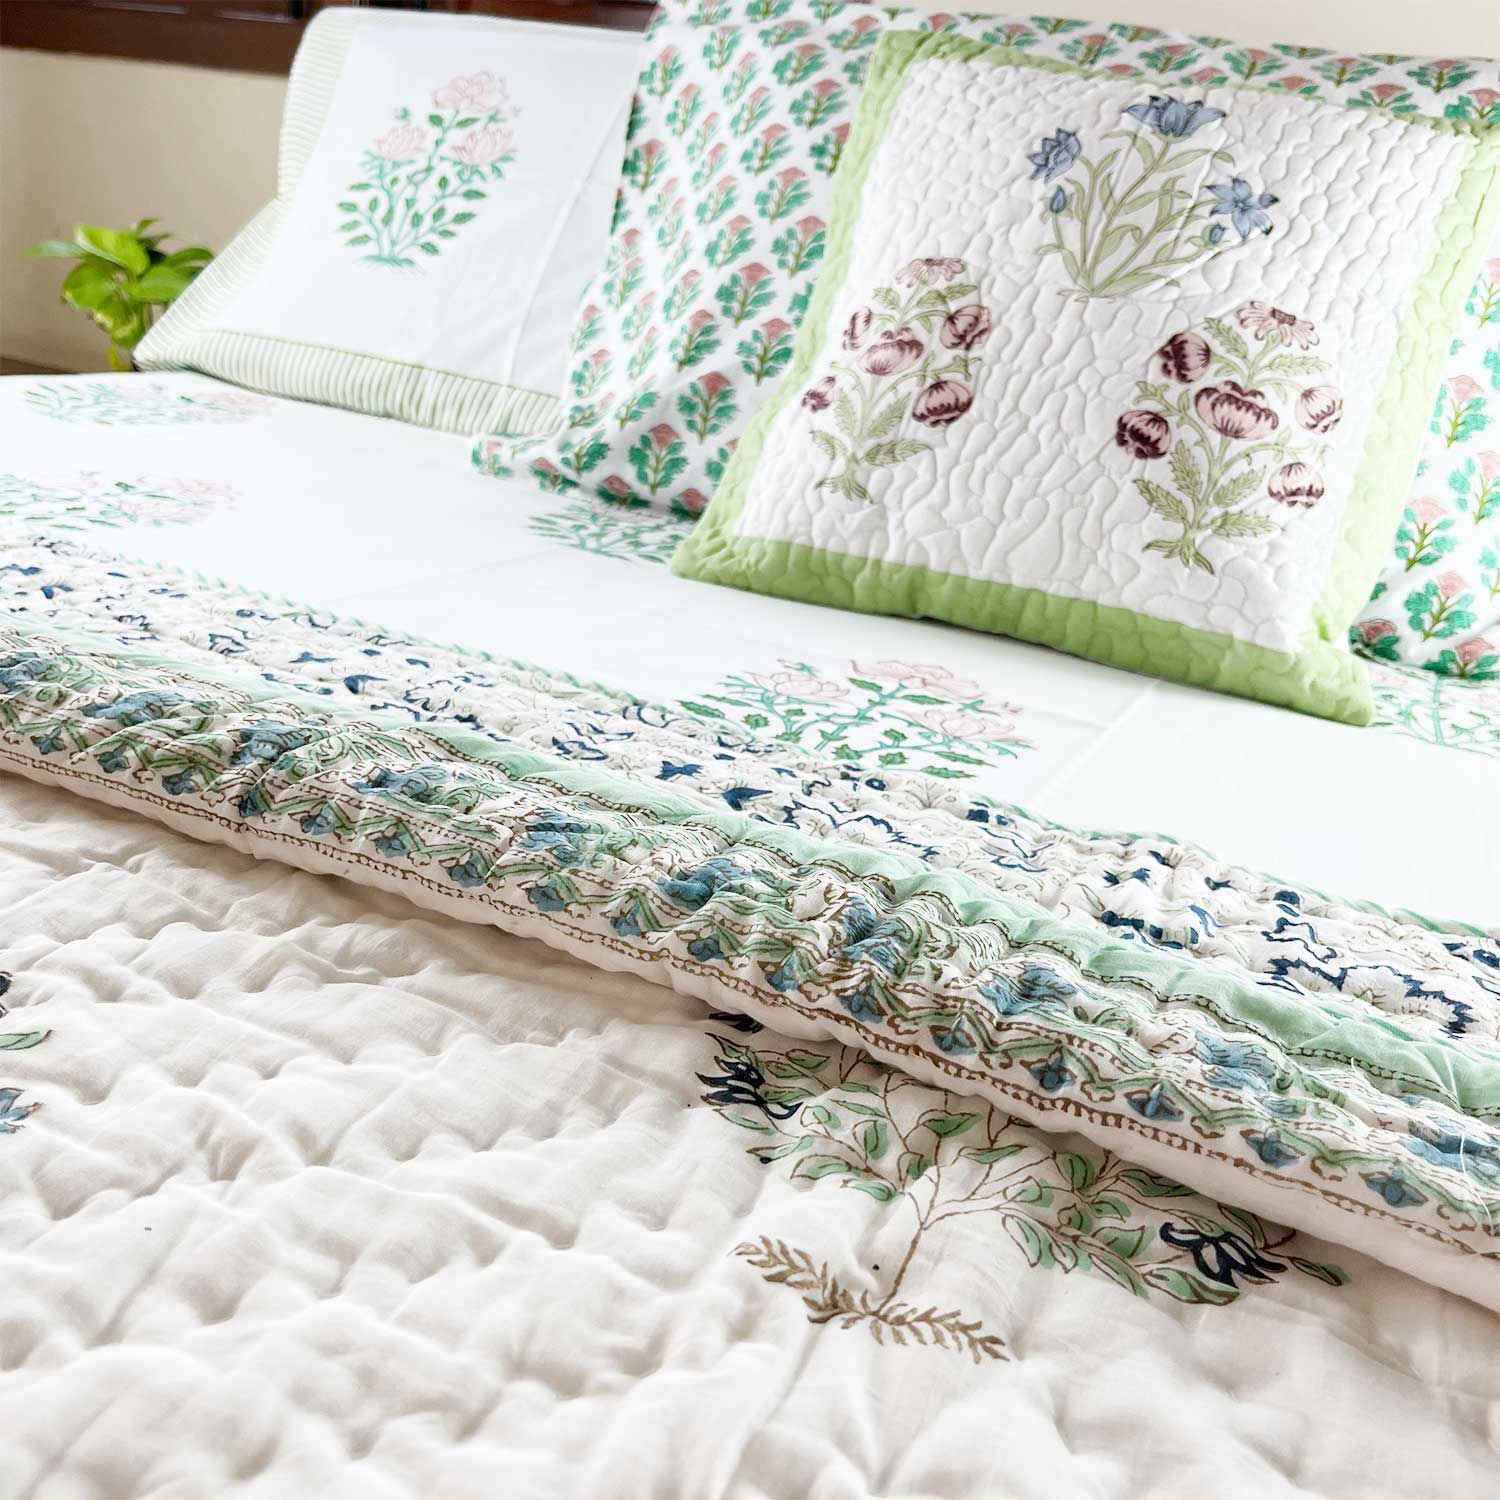 Green & White Soft Cotton Printed Quilt - 90 inches x 100 inches